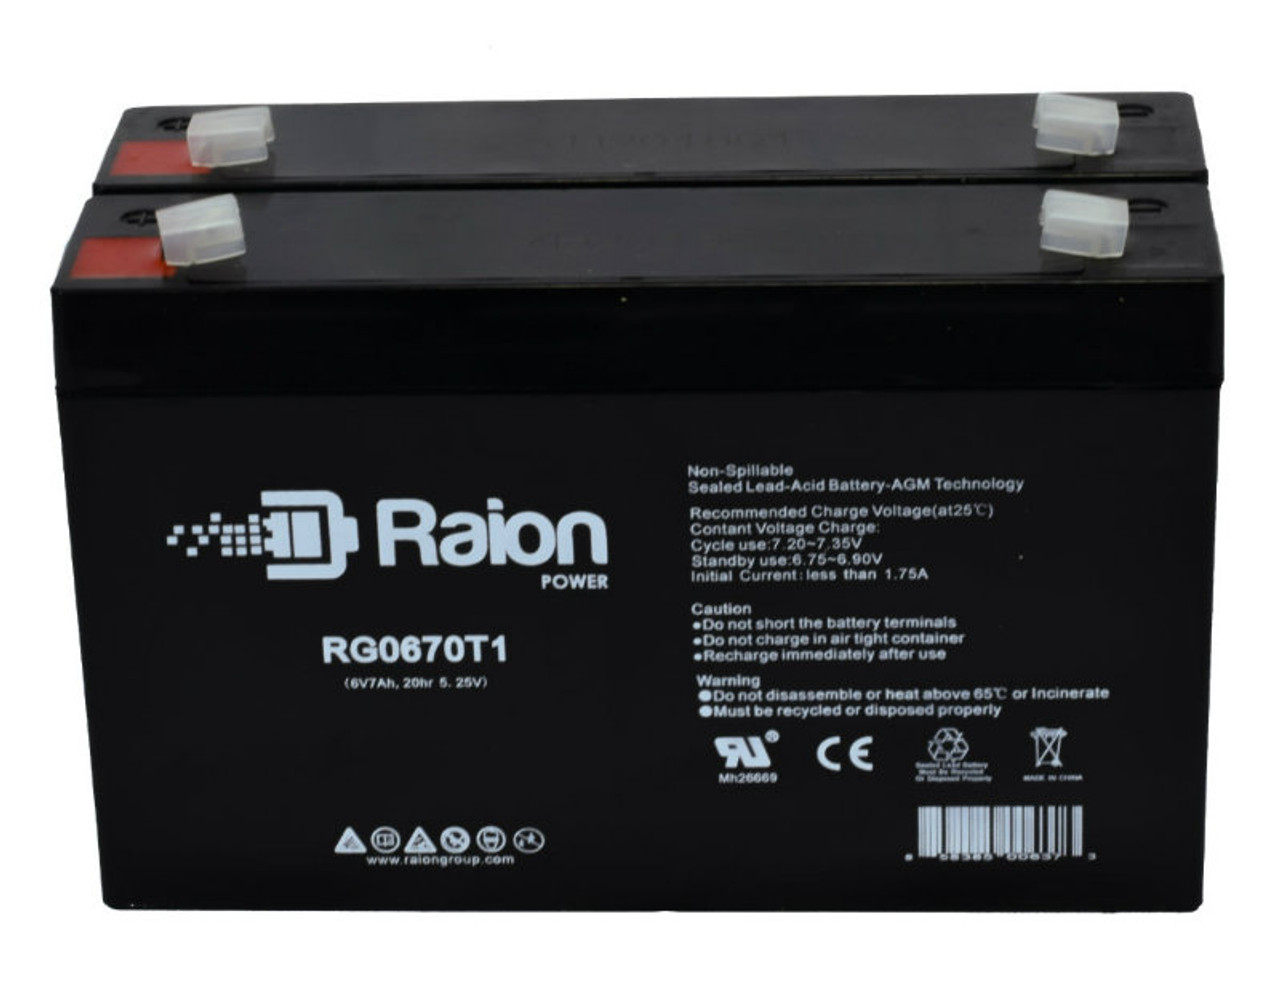 Raion Power RG0670T1 6V 7Ah Replacement Emergency Light Battery for Sonnenschein N67IWC - 2 Pack